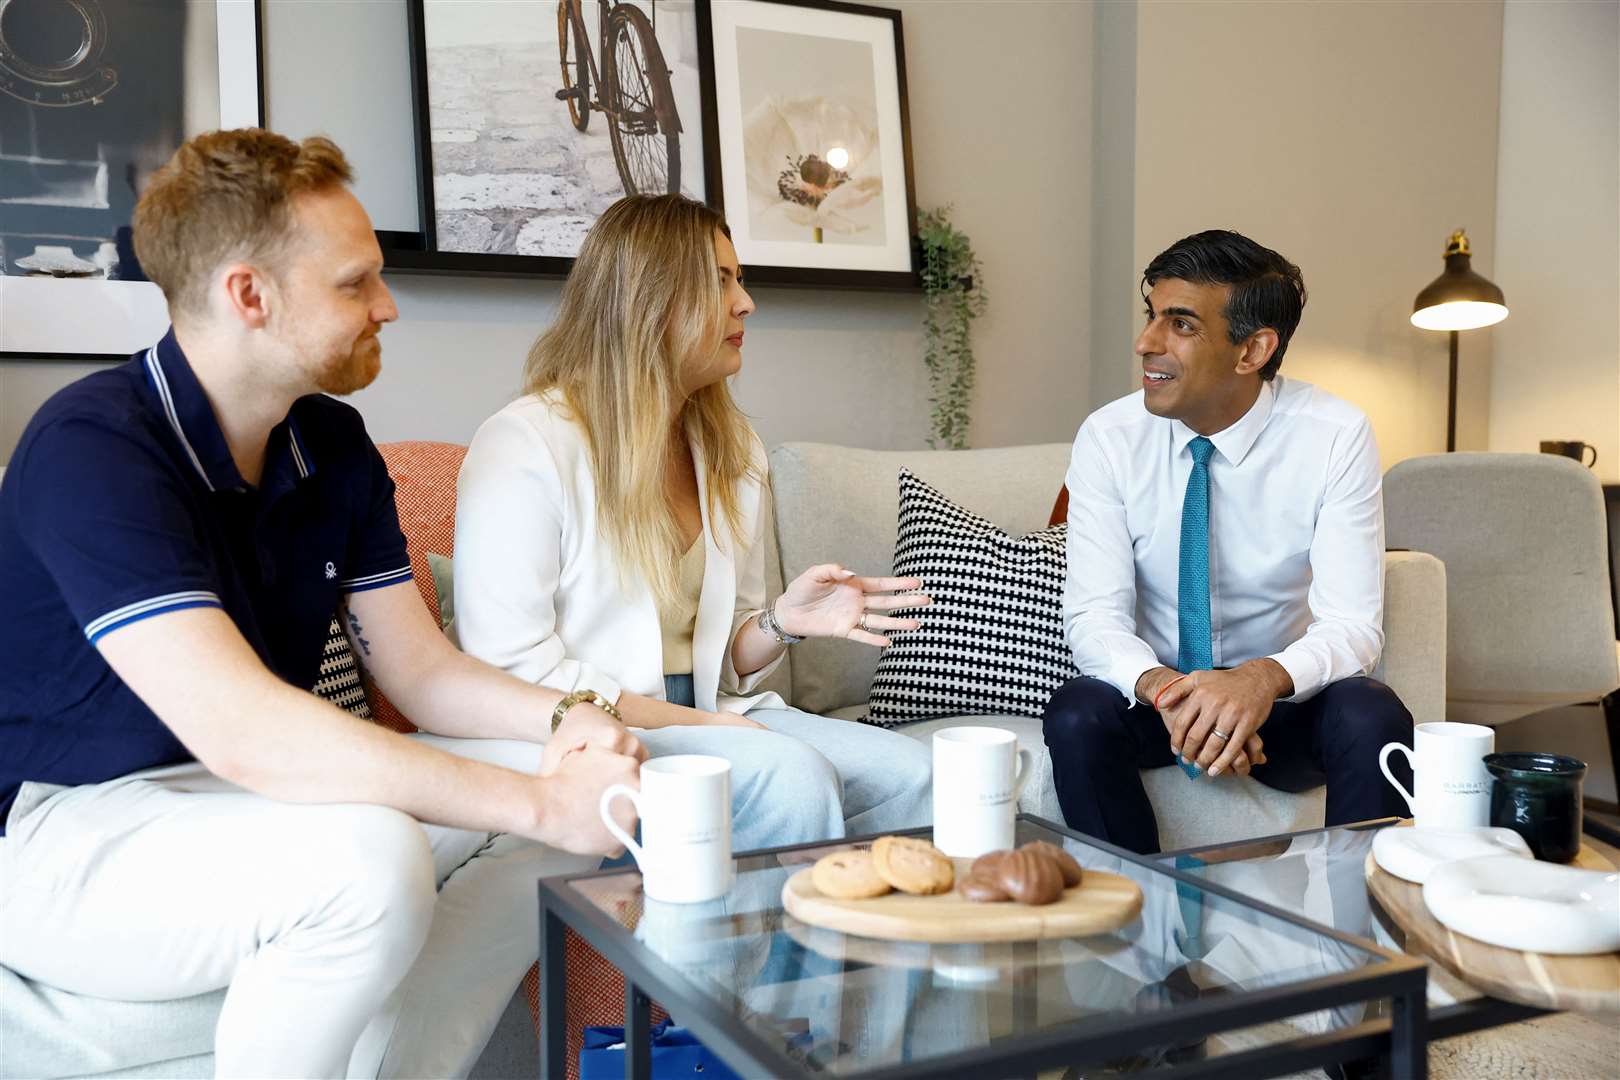 Prime Minister Rishi Sunak speaks to new homeowners Victoria and Ryan Adair during a visit to Hayes Village (Pete Cziborra/PA)